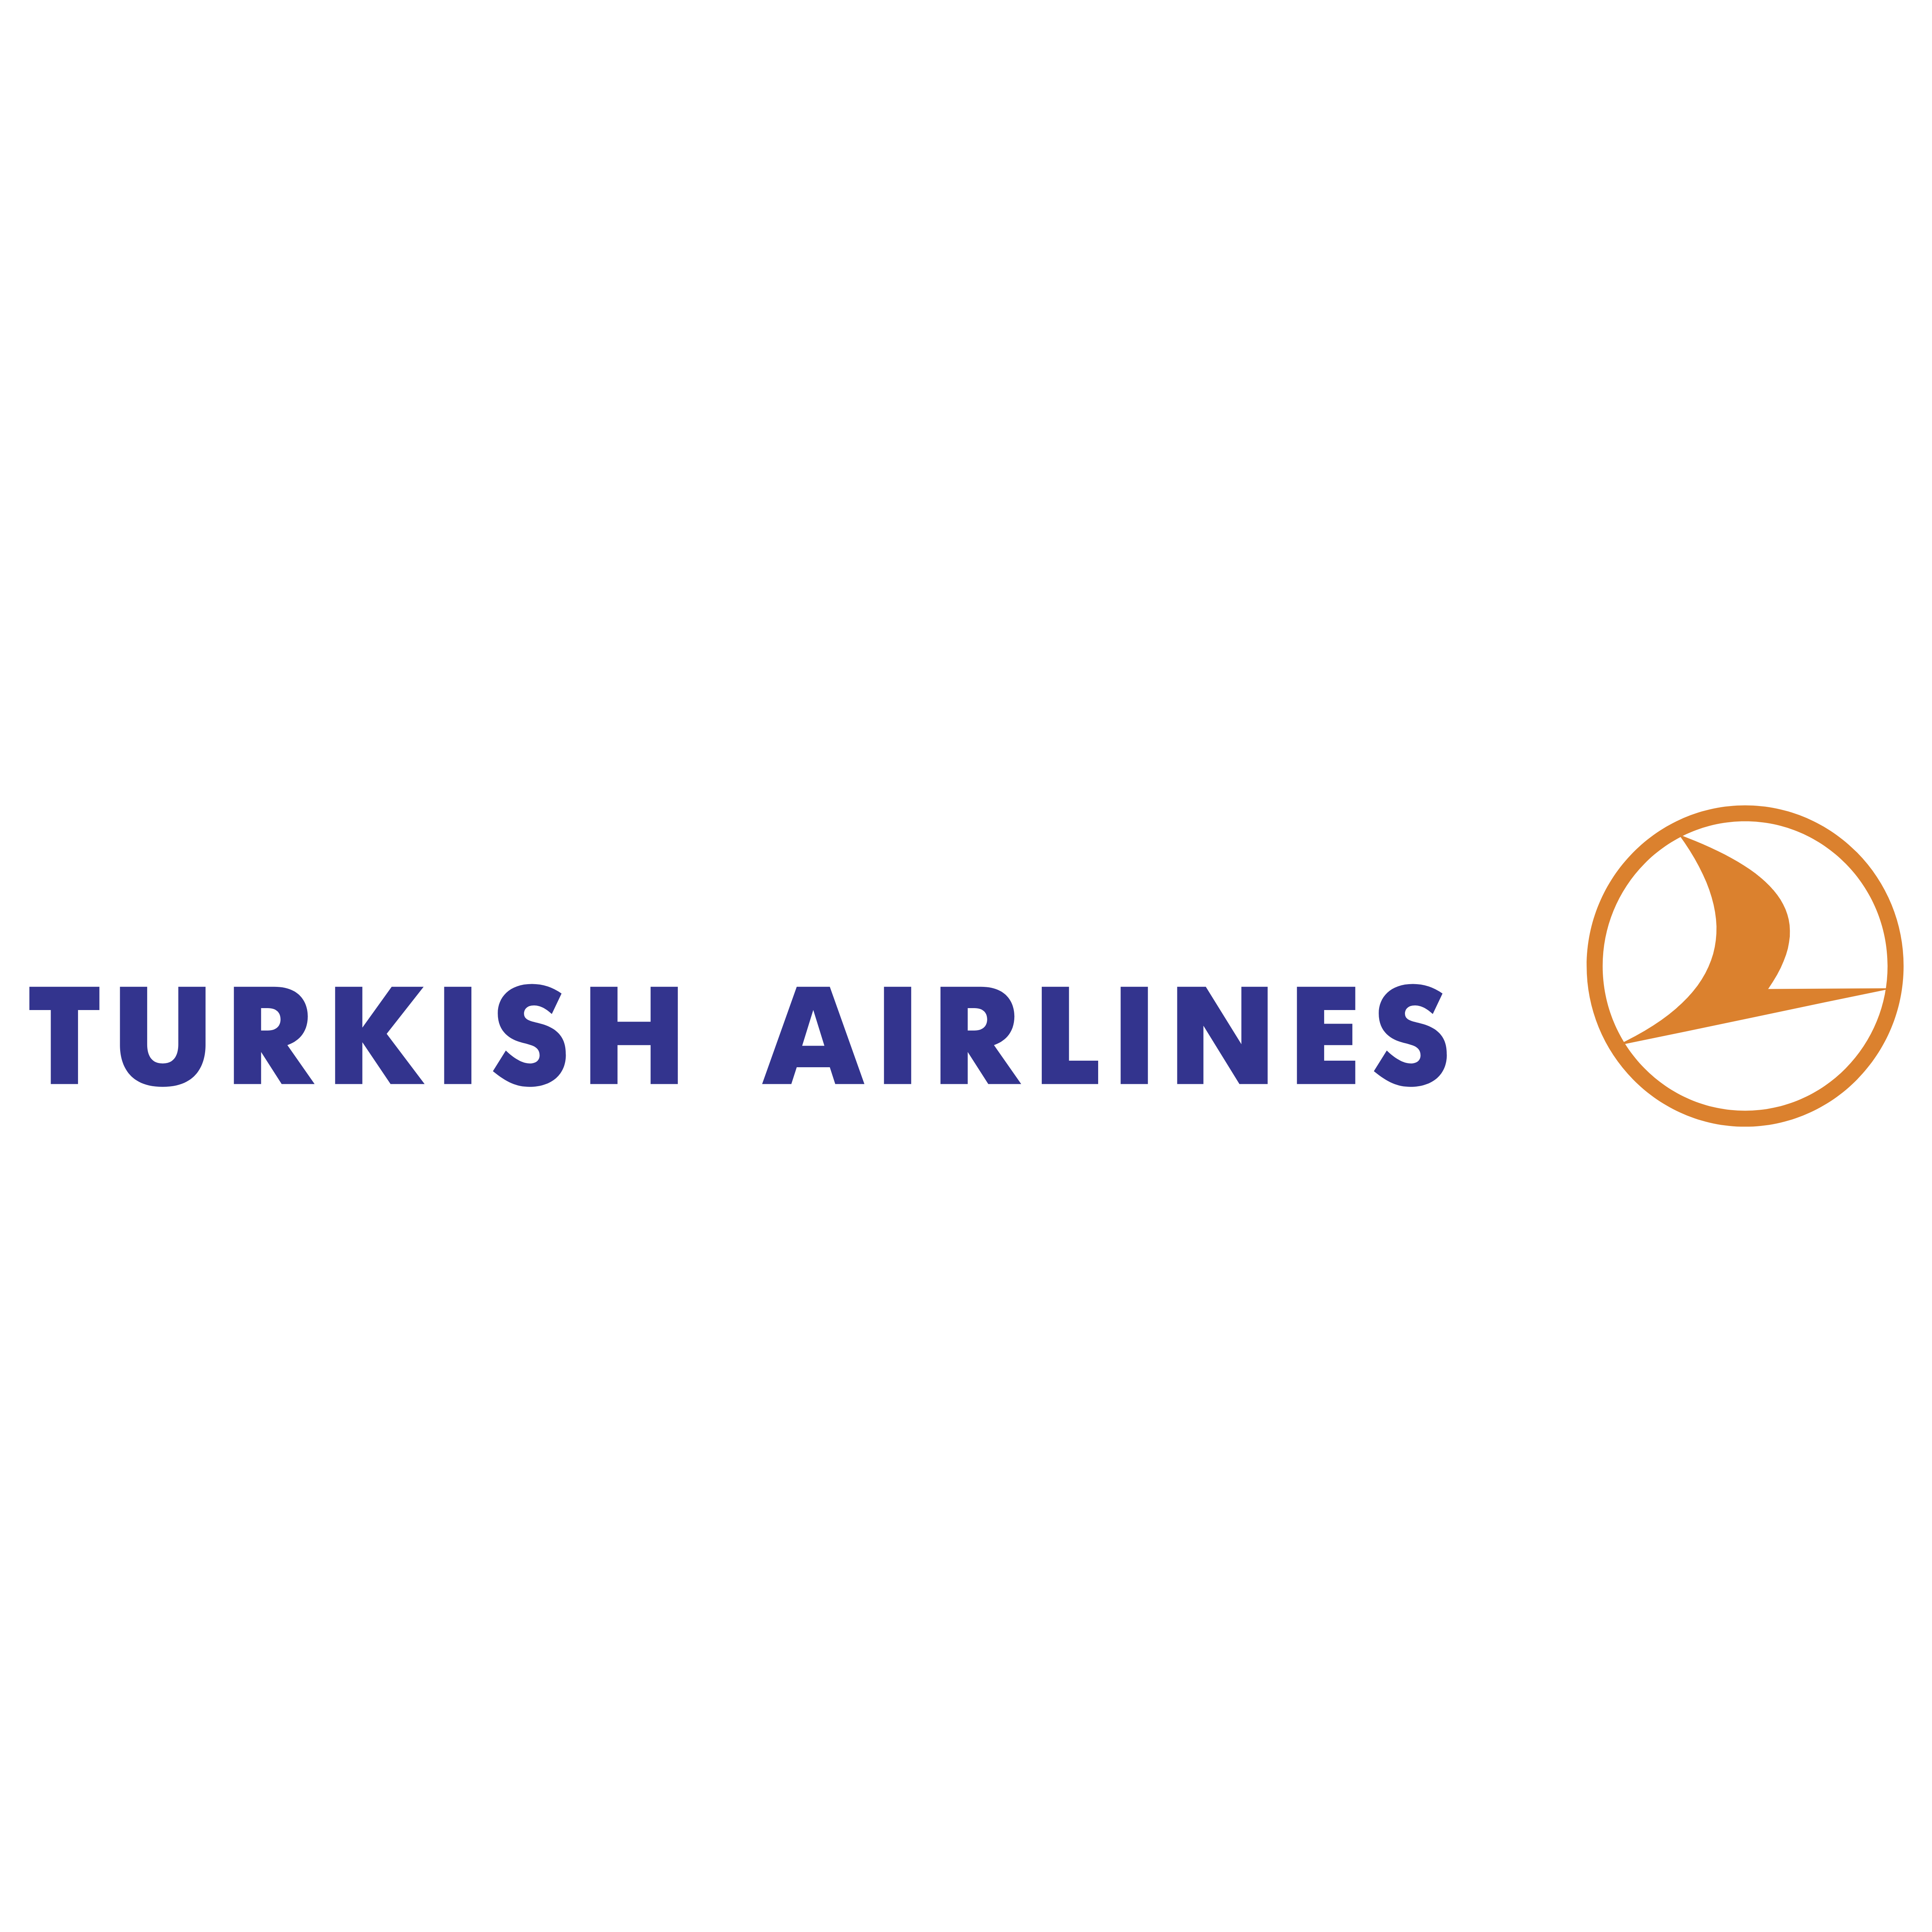 Turkish Airlines – Logos Download - Turkish Airlines, Transparent background PNG HD thumbnail